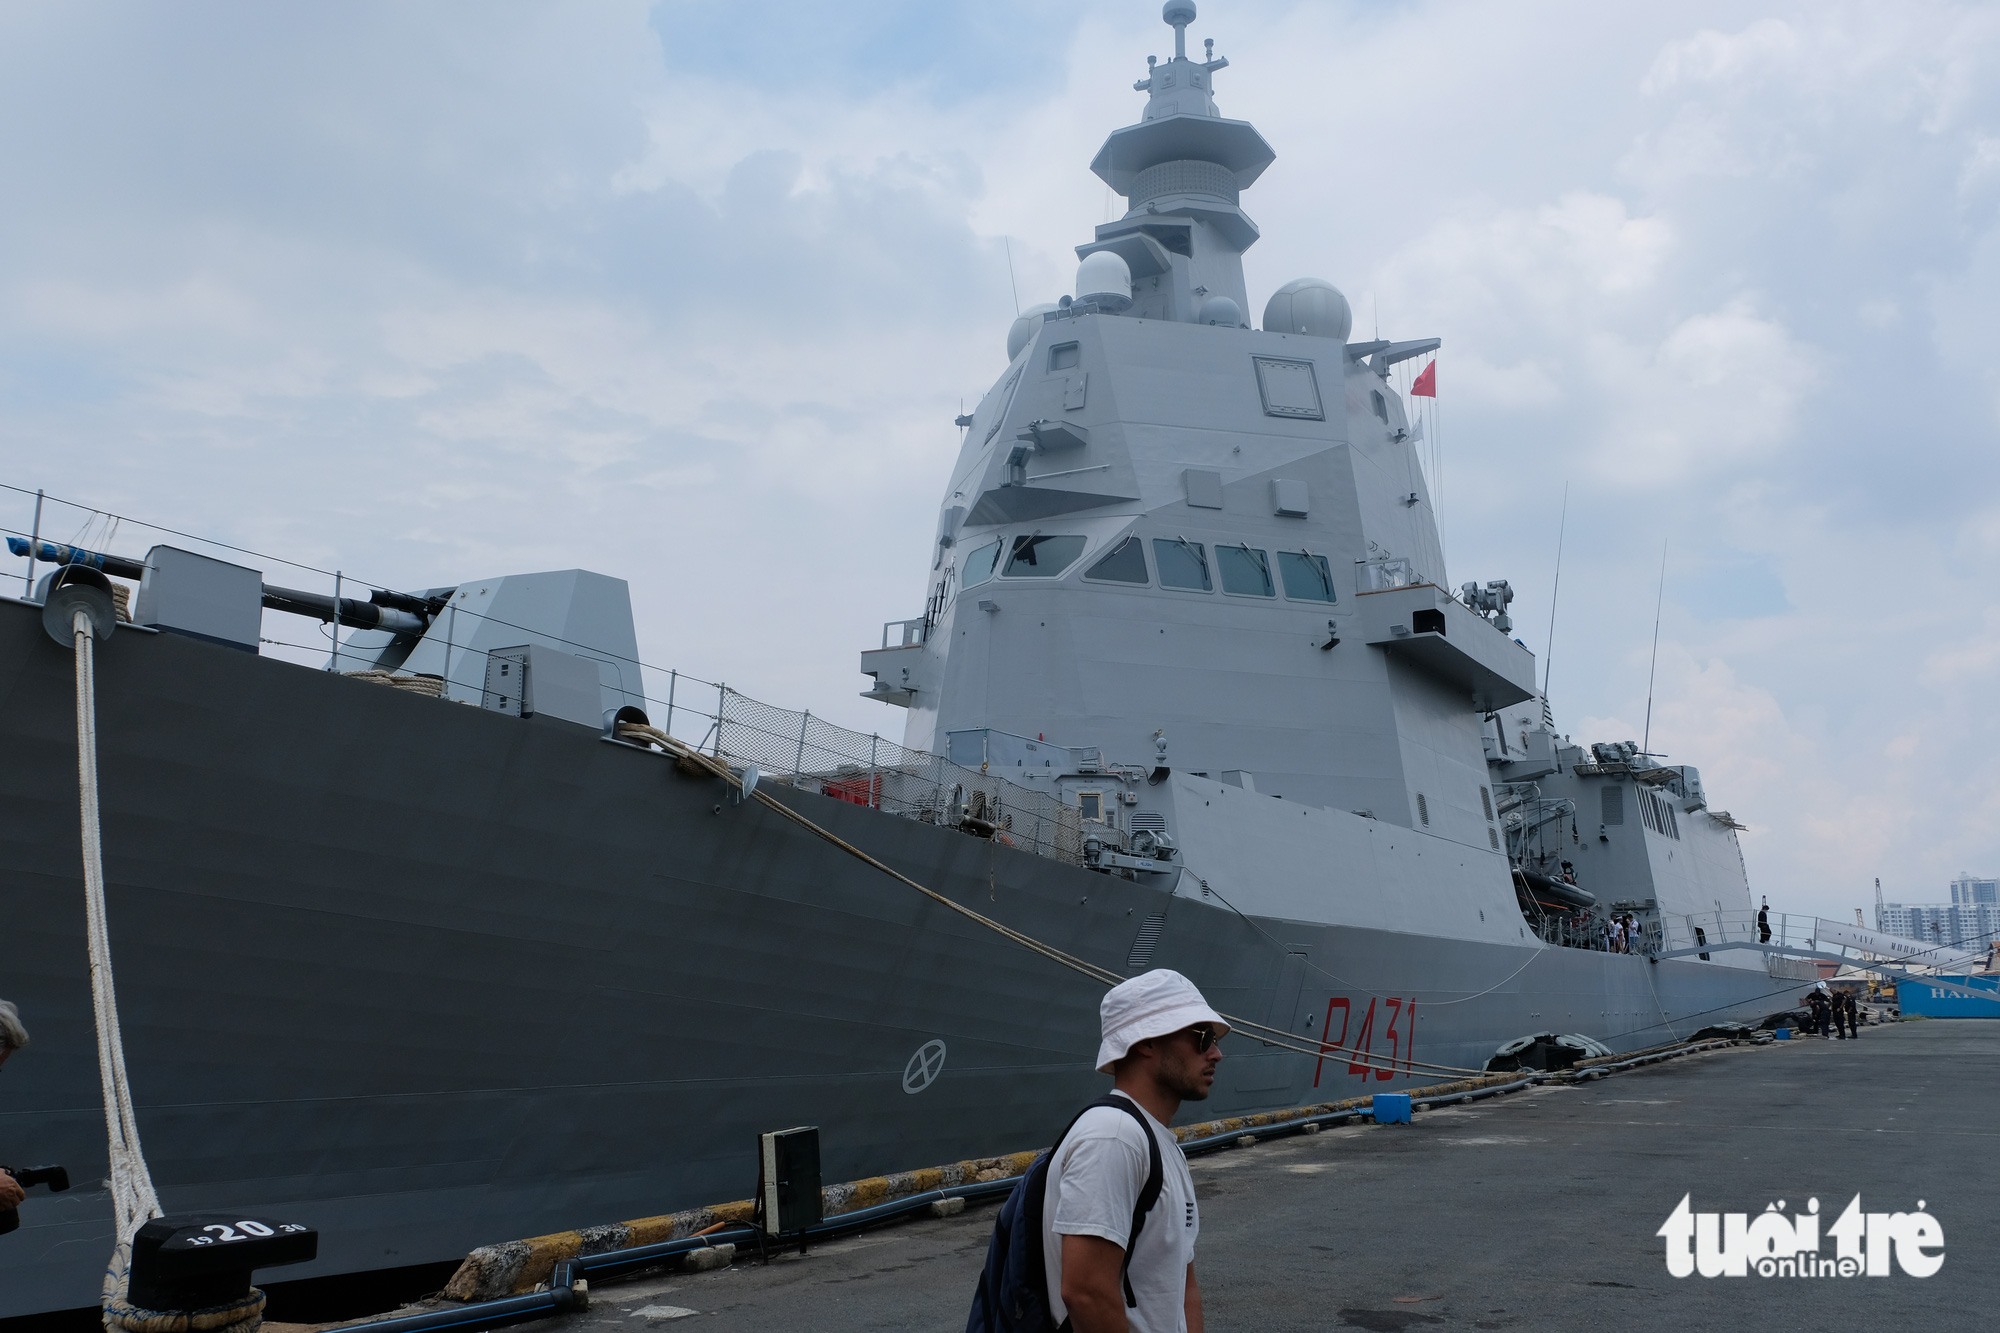 Italian navy vessel with advanced technologies makes port call in Ho Chi Minh City